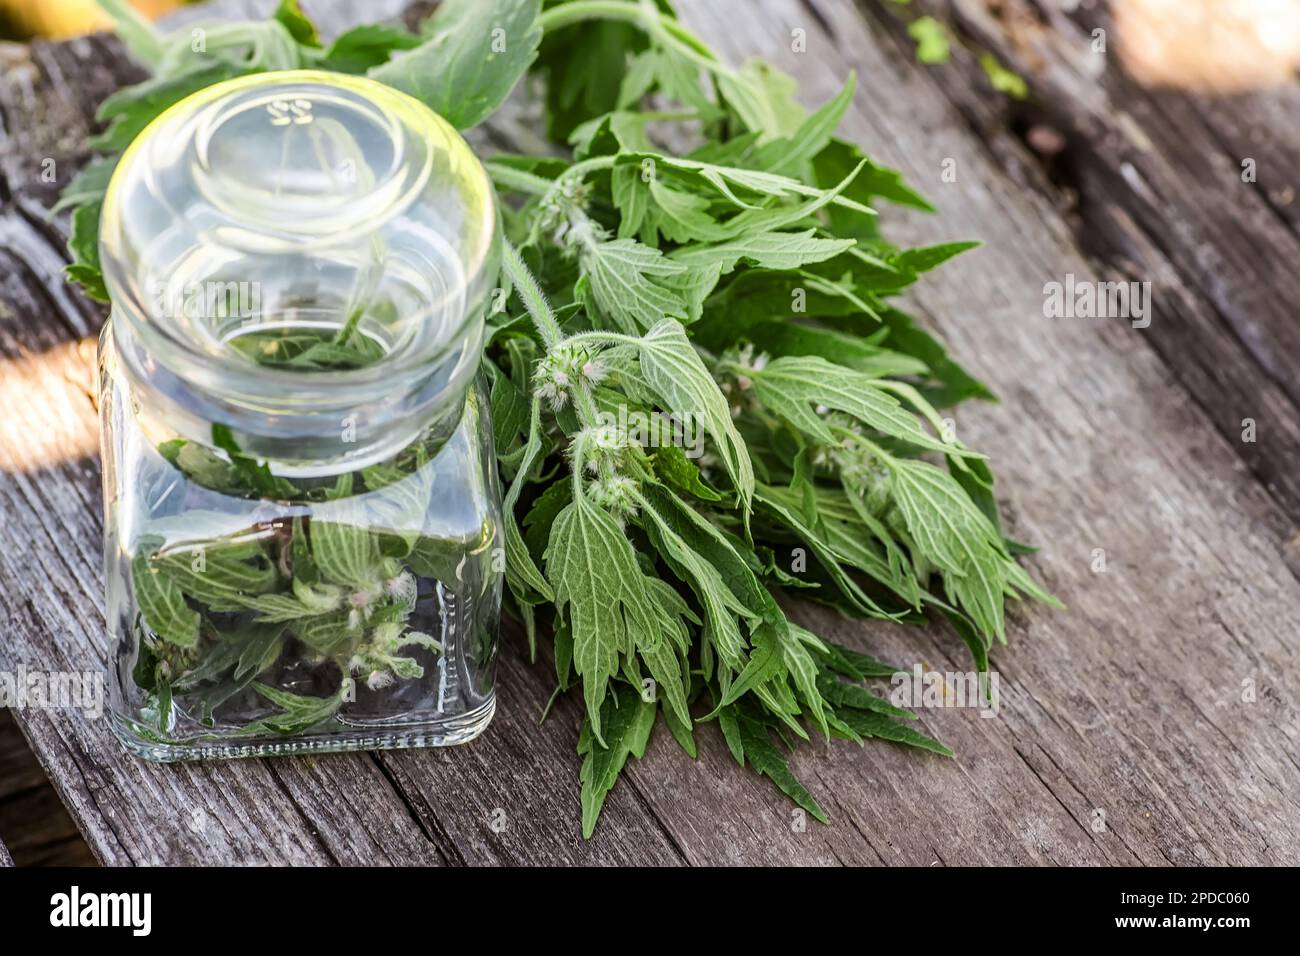 Leonurus cardiaca, motherwort, throw-wort, lion's ear, lion's tail medicinal plant . Transparent glass jar with condemned herbal. Ingredient for Stock Photo